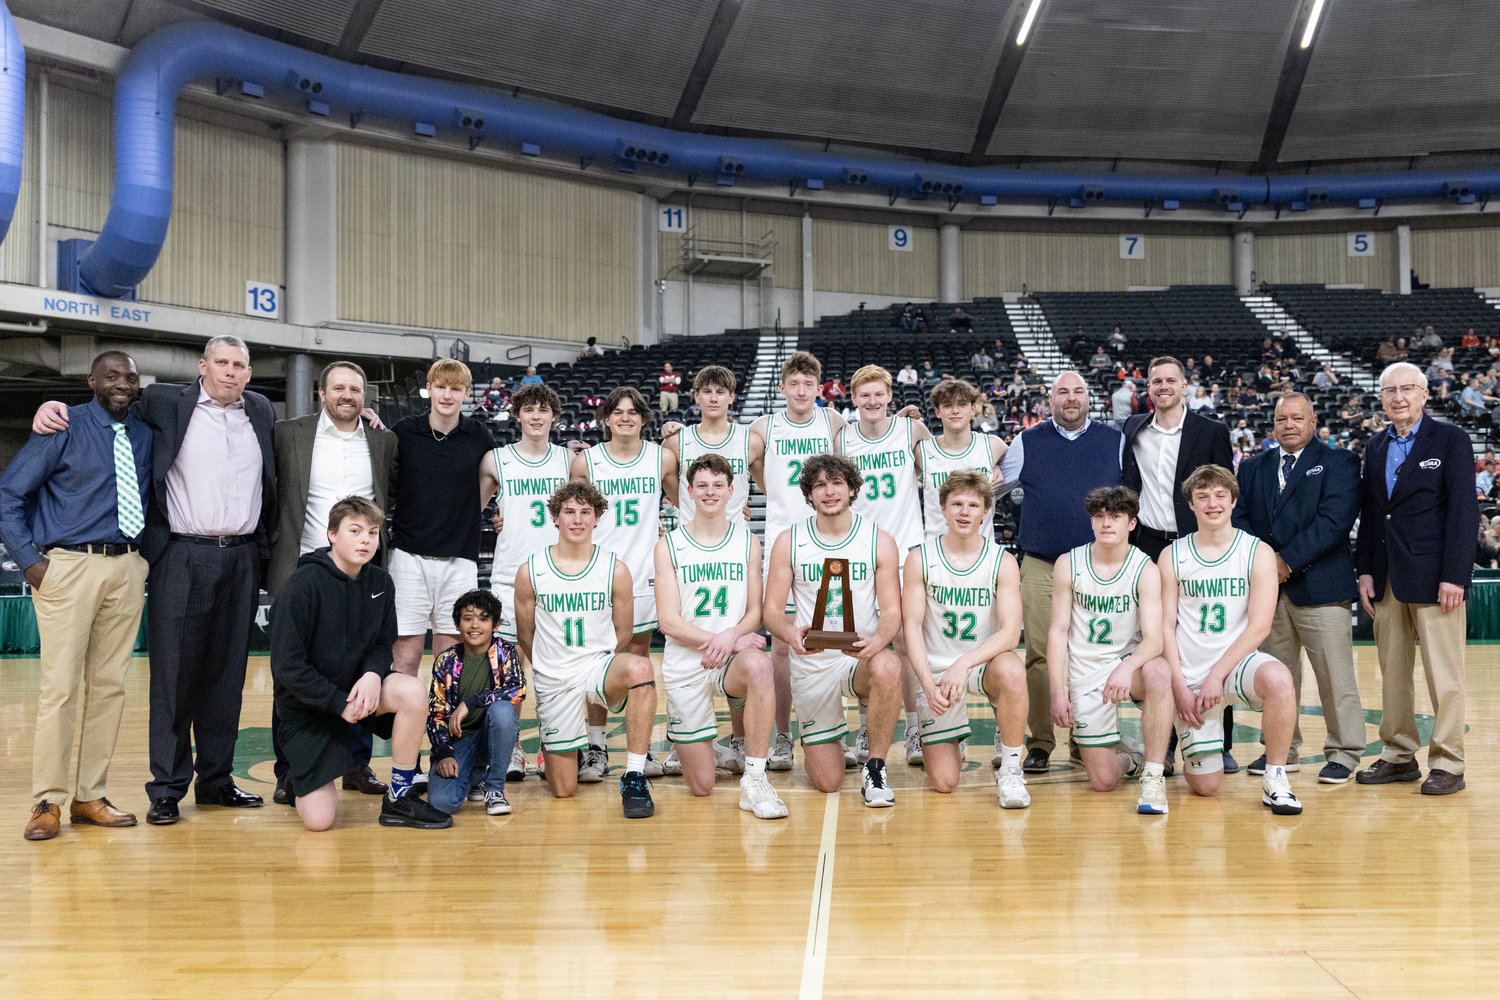 The Tumwater boys basketball team poses with the fourth-place trophy at the 2A state tournament in Yakima March 5.